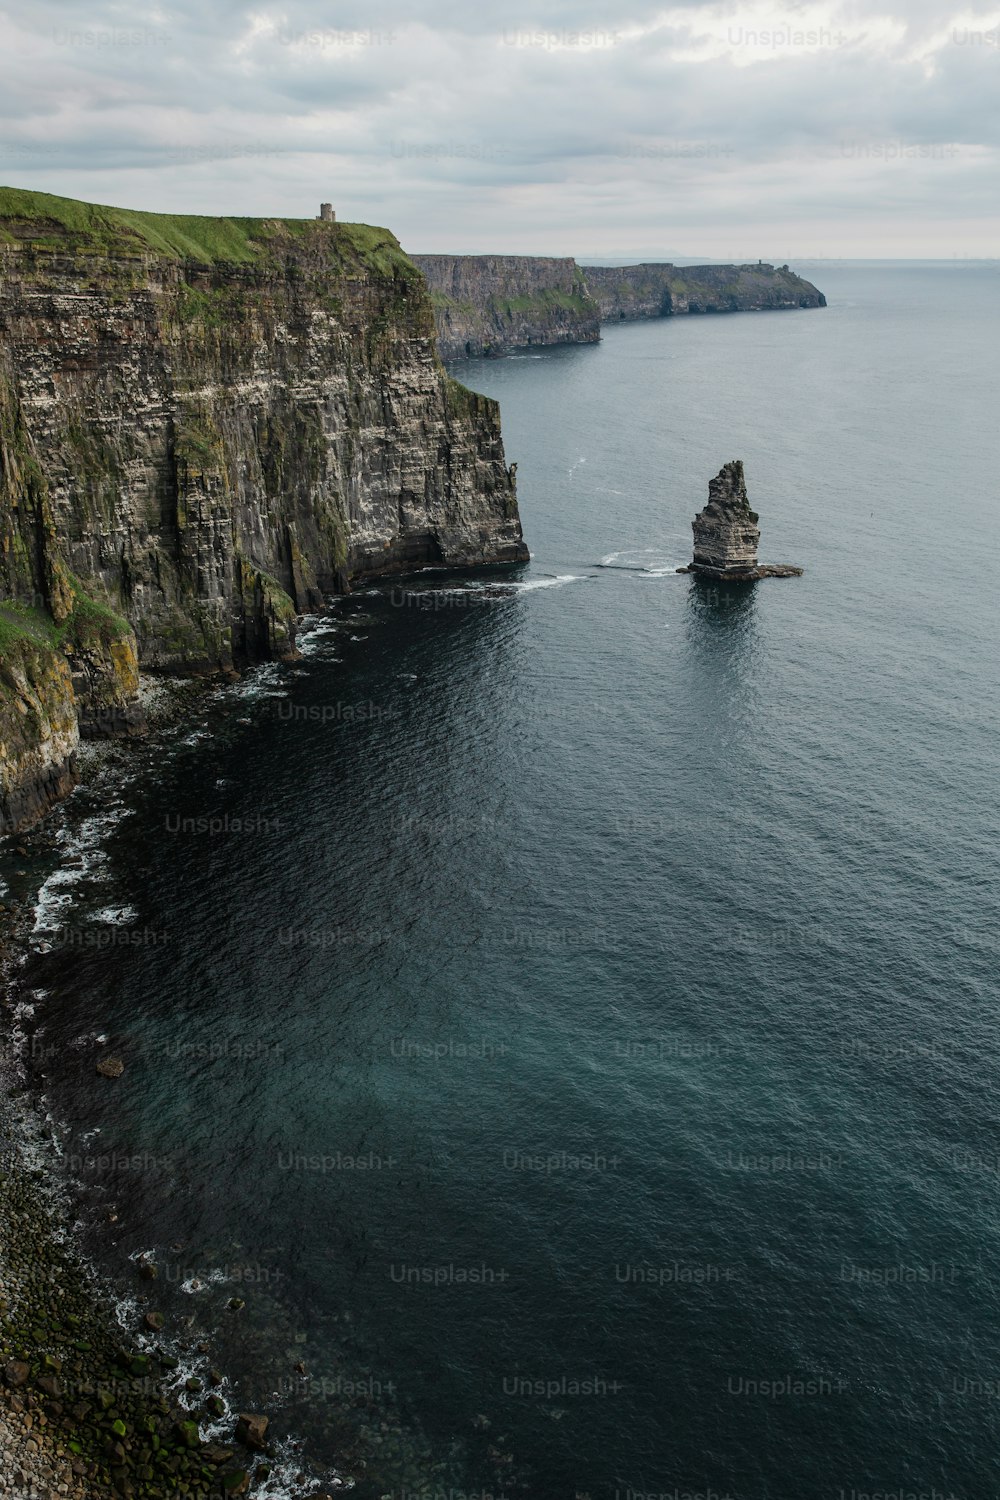 a boat is out on the water near a cliff